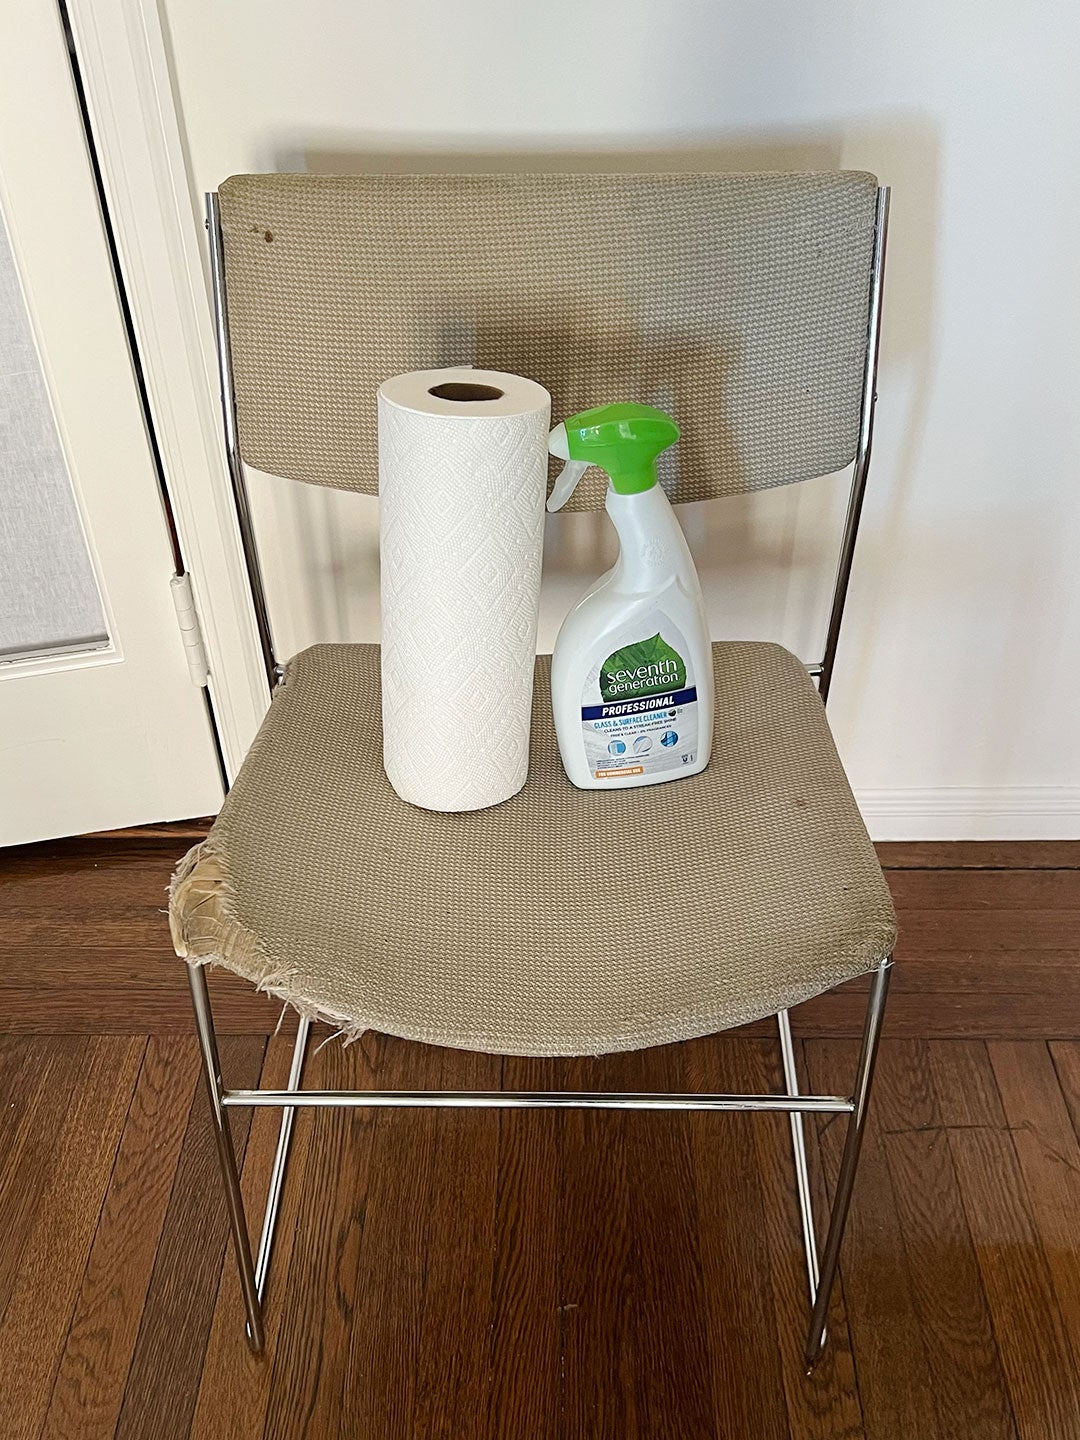 Chair with paper towel roll and cleaning solution on it